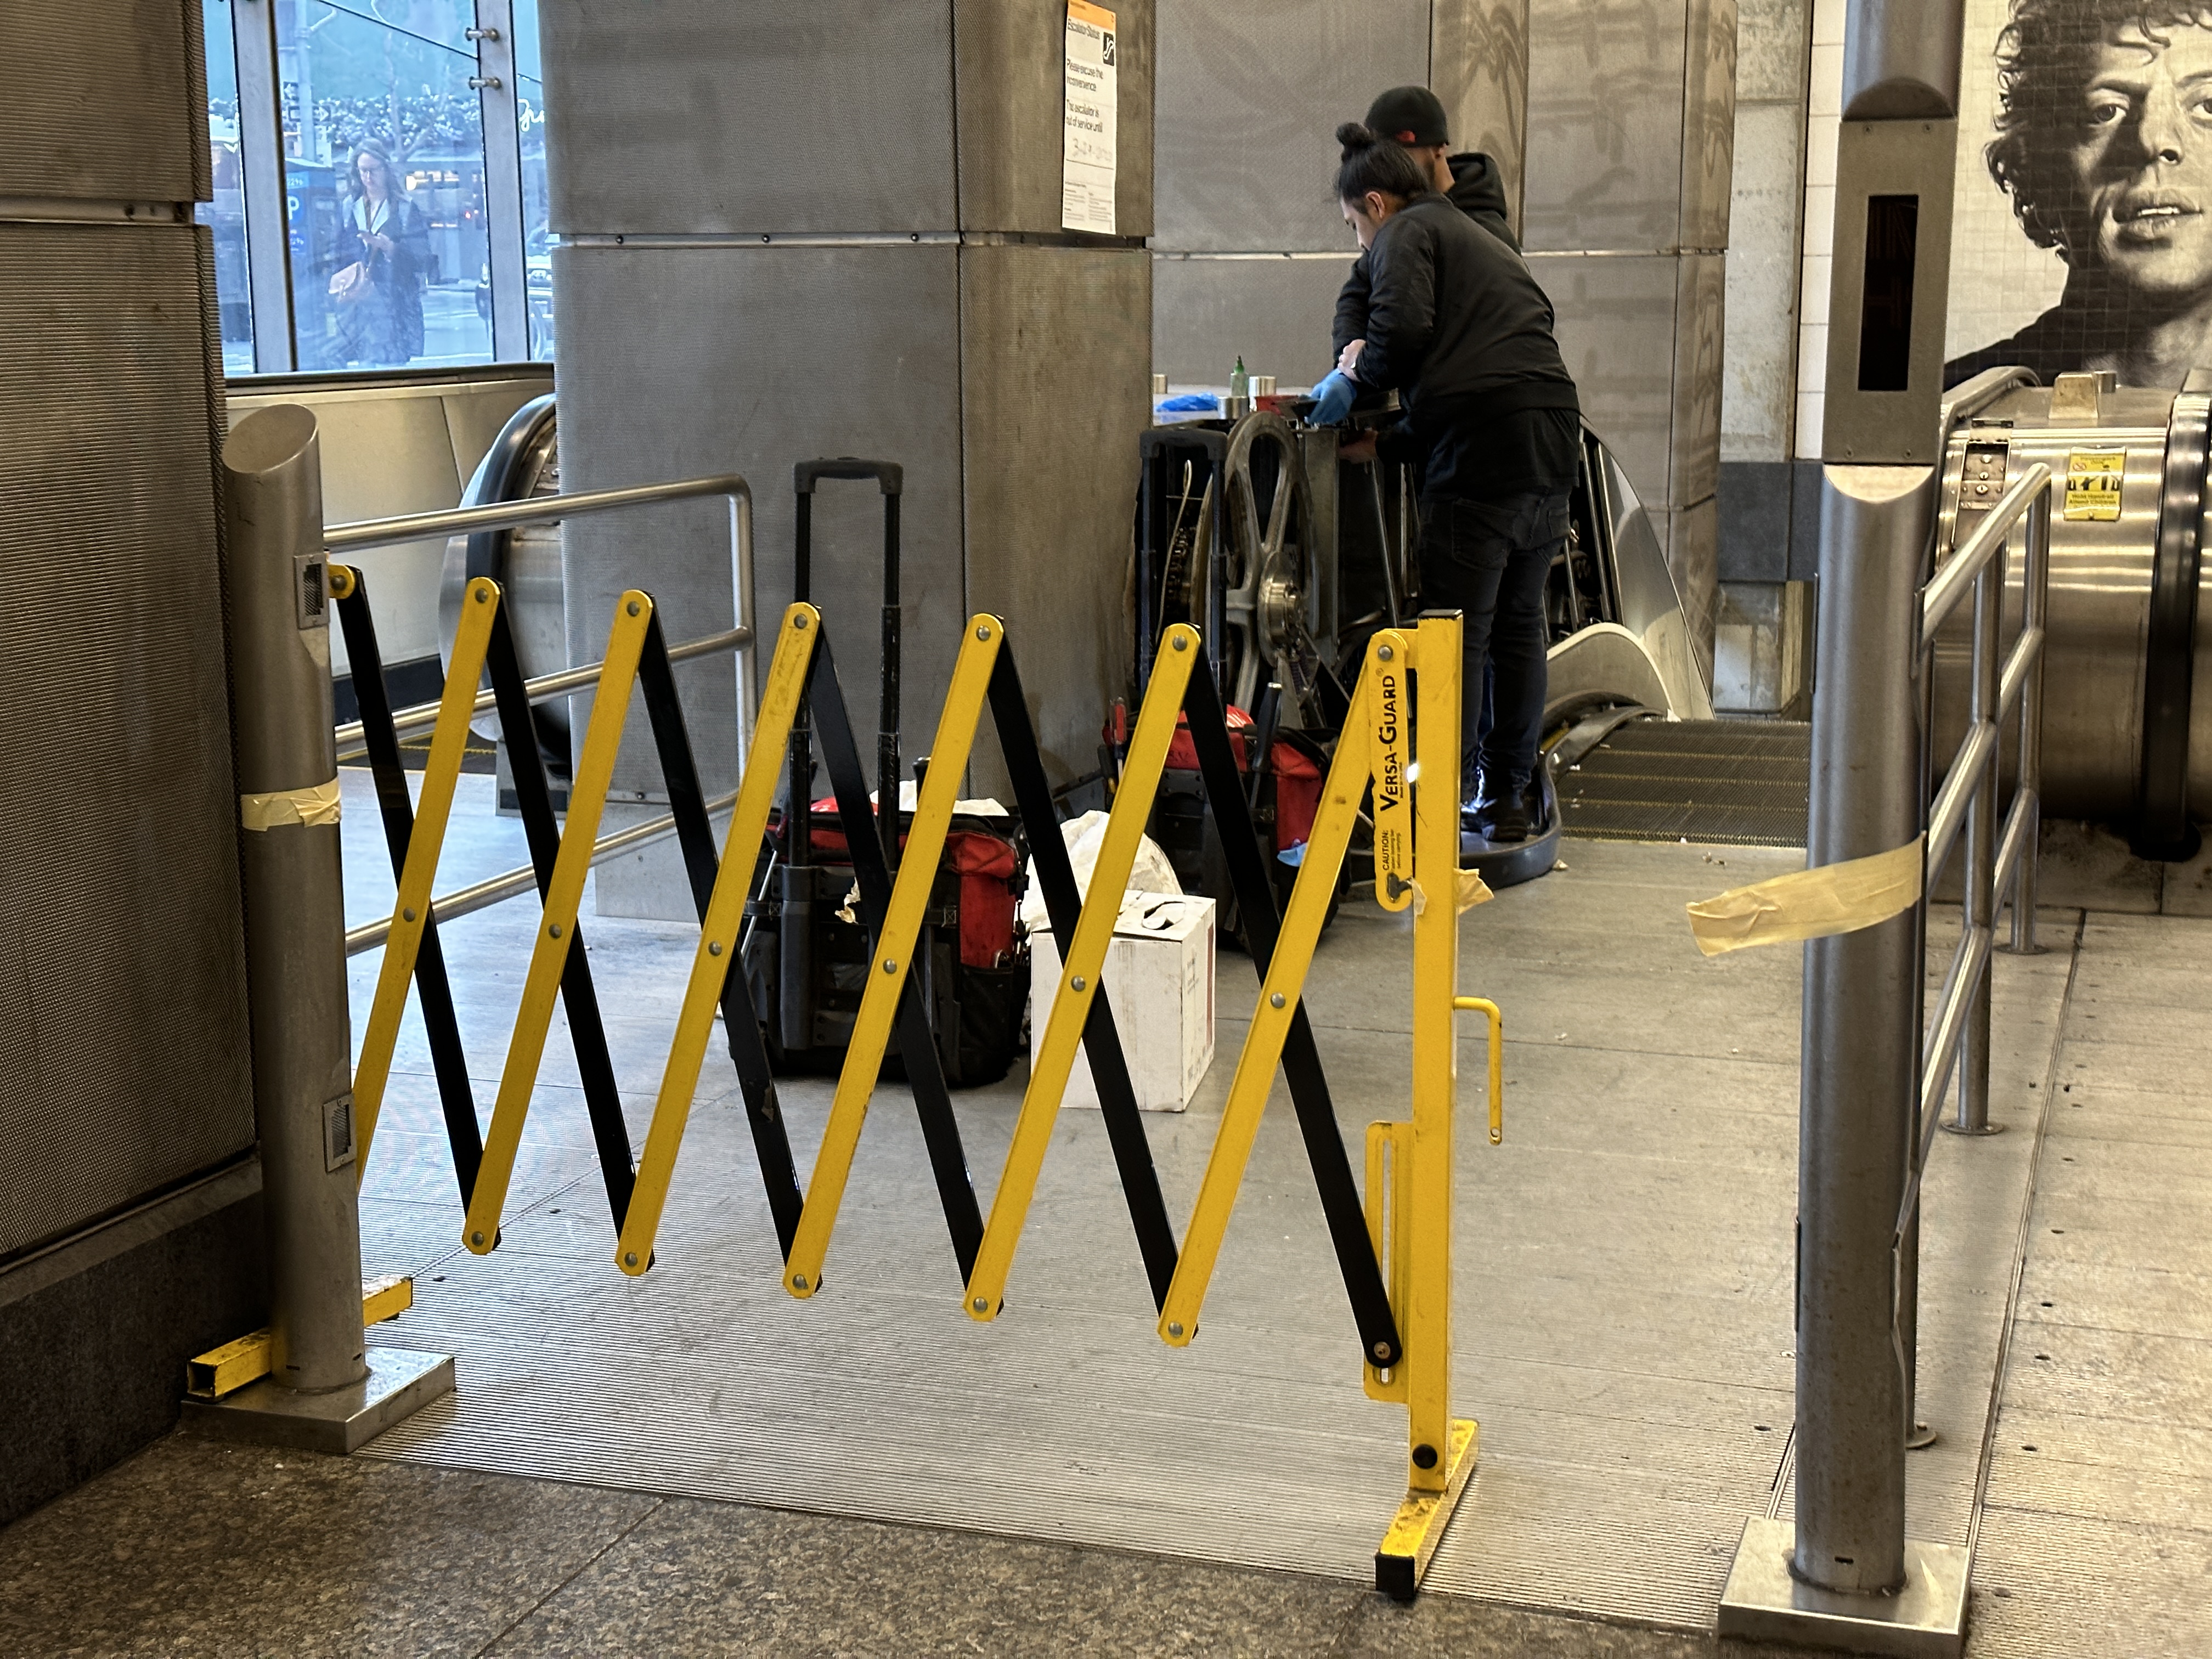 Contractors were seen making repairs to the broken escalator on Tuesday | Upper East Site